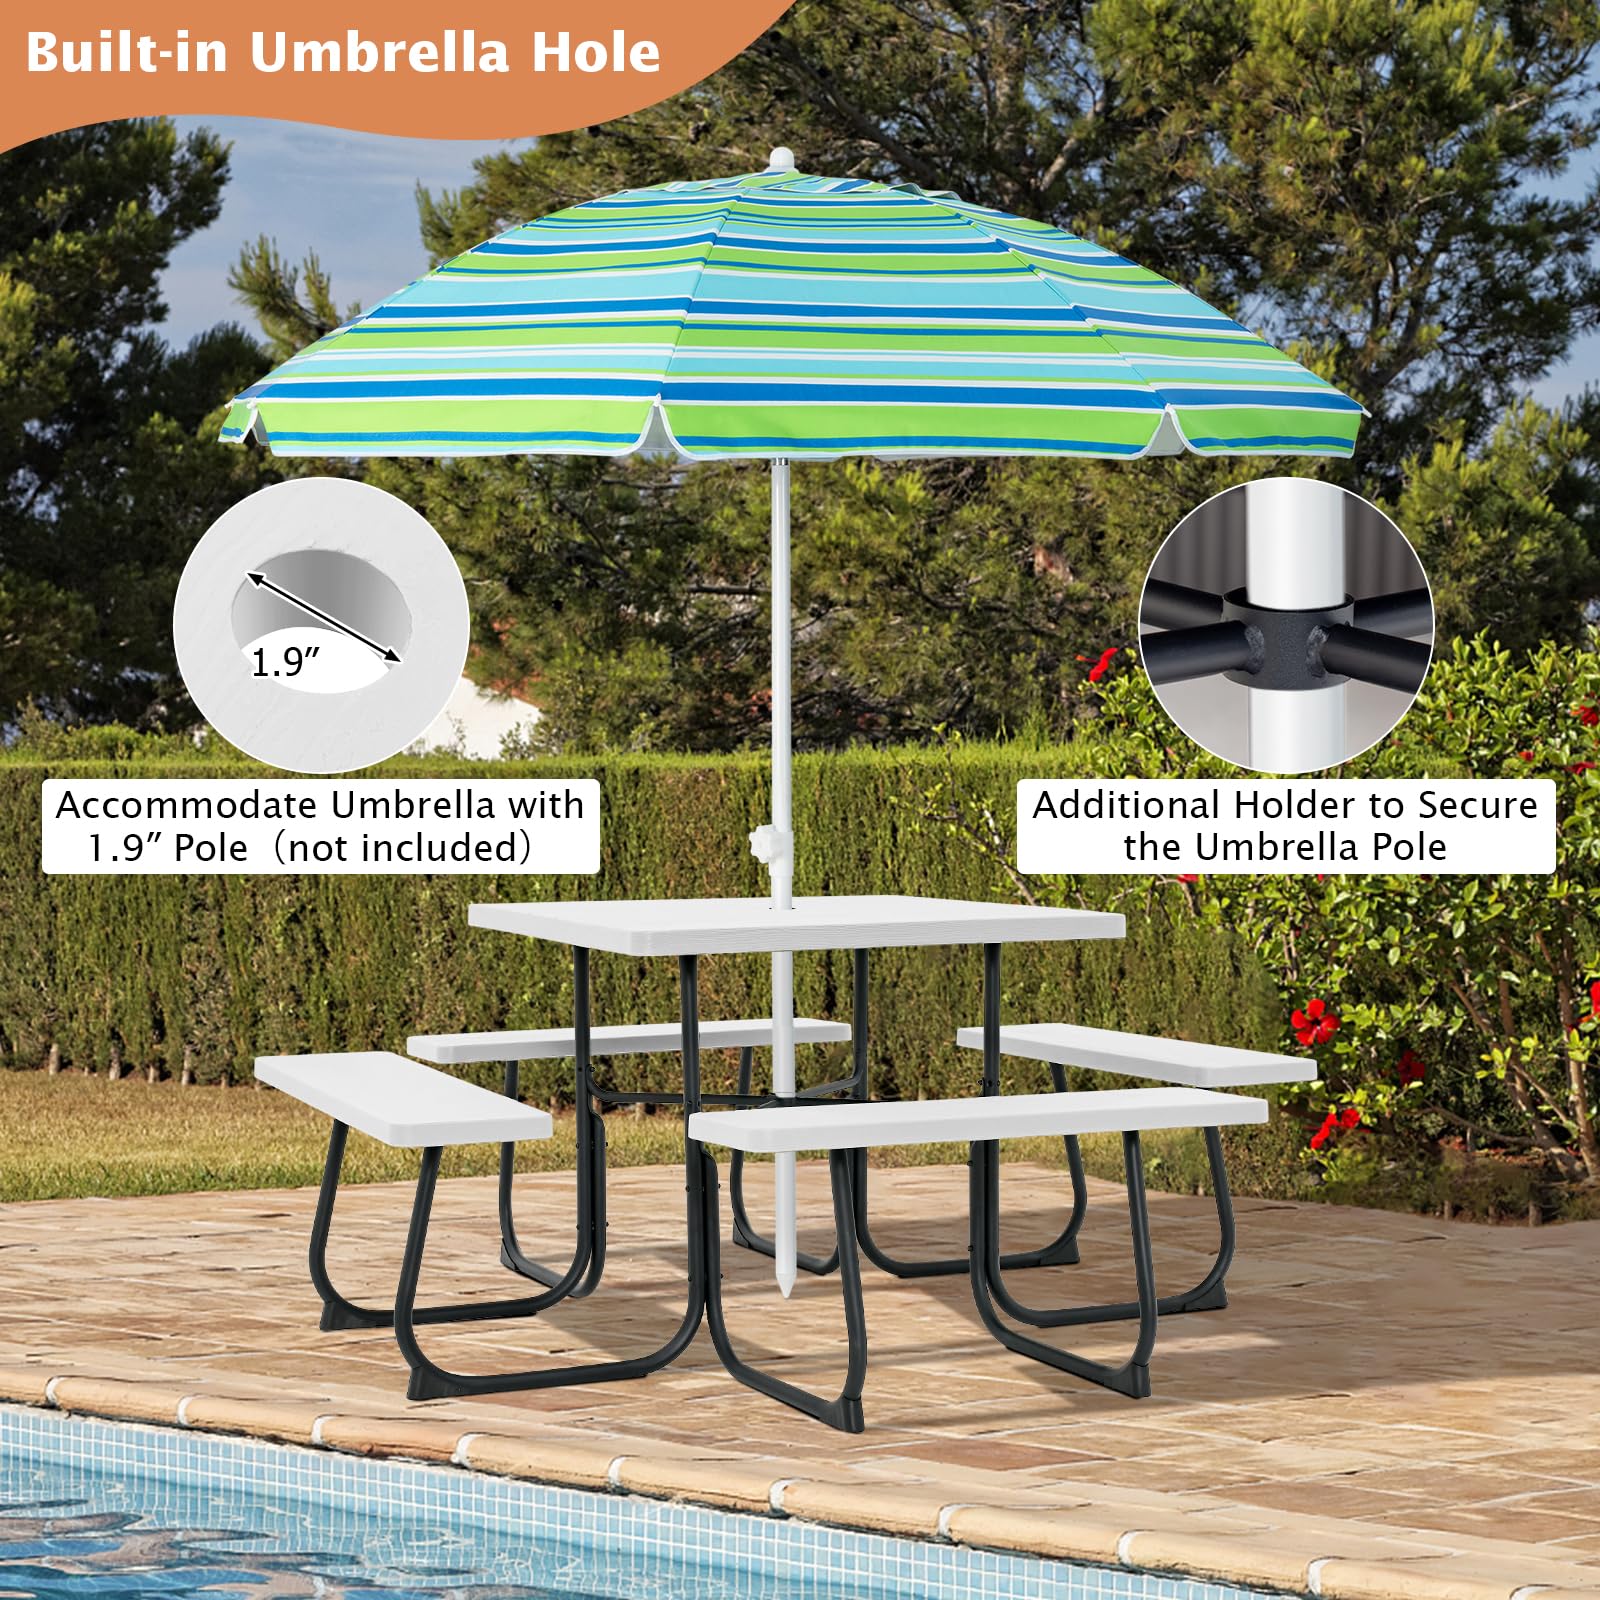 Giantex Picnic Table Set for 4-8 Persons, Outdoor Table and Bench Set with Umbrella Hole, HDPE Top & Metal Frame